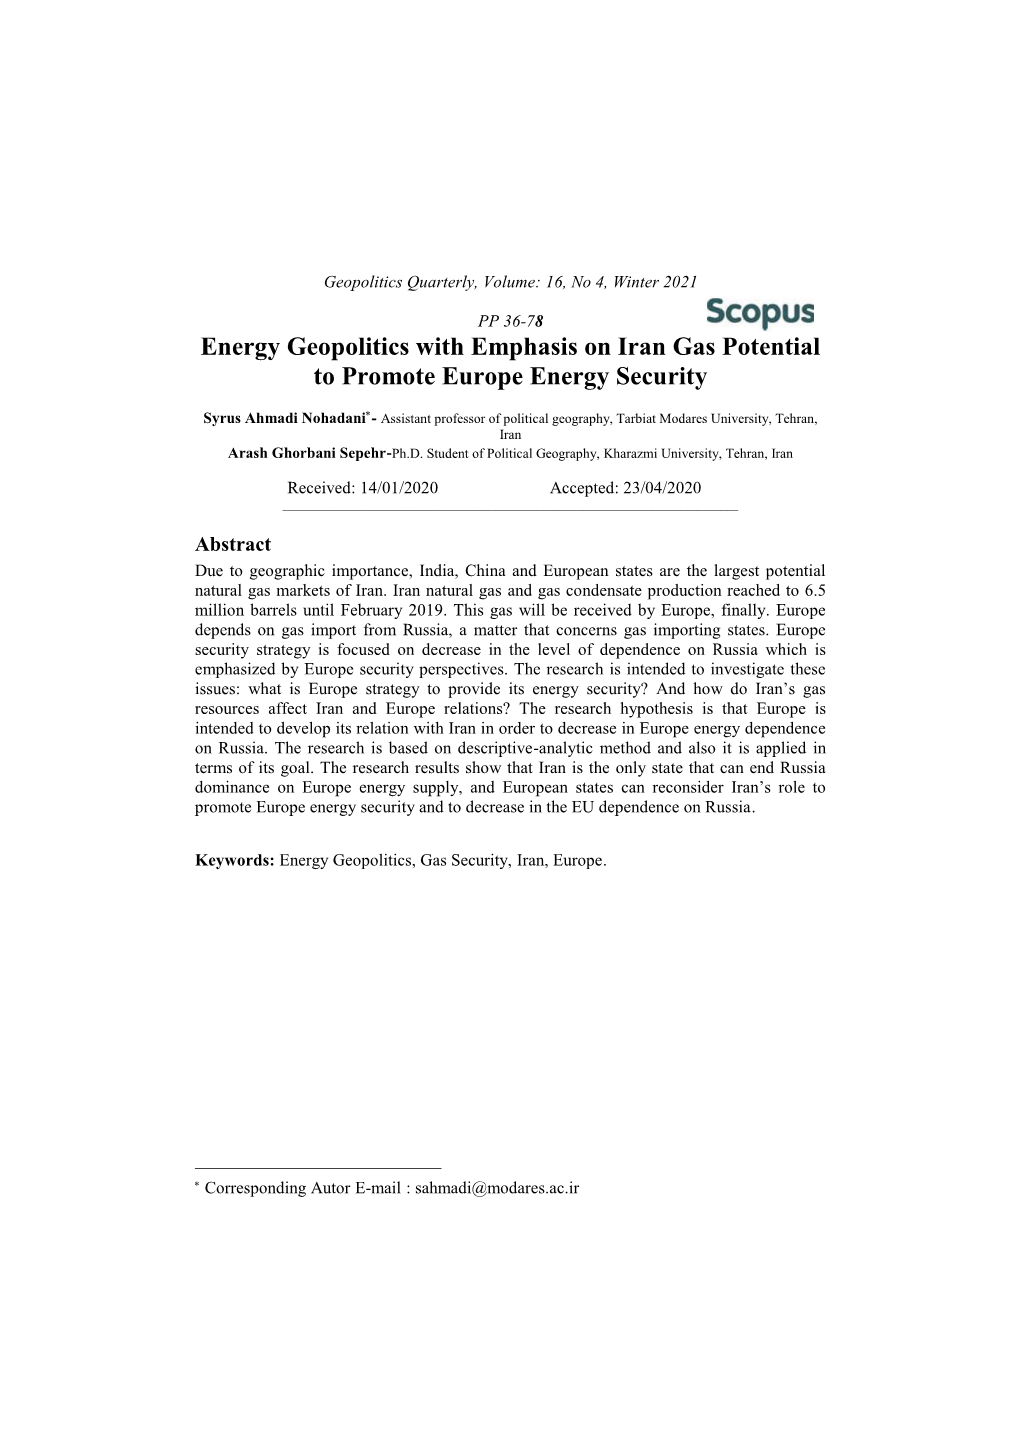 Energy Geopolitics with Emphasis on Iran Gas Potential to Promote Europe Energy Security